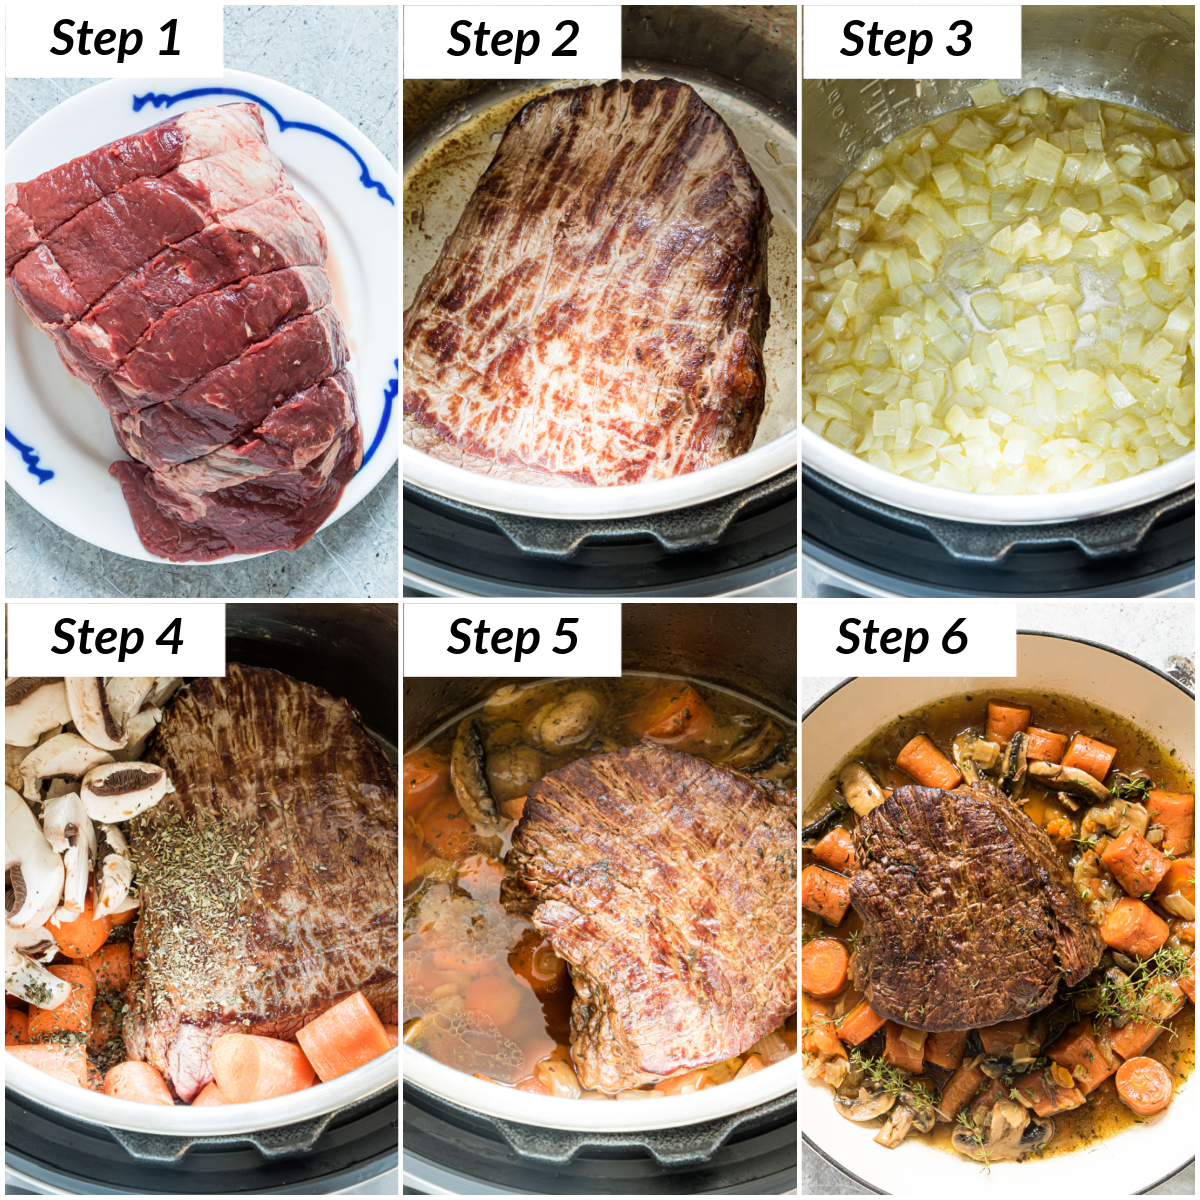 image collage showing the steps for making instant pot pot roast